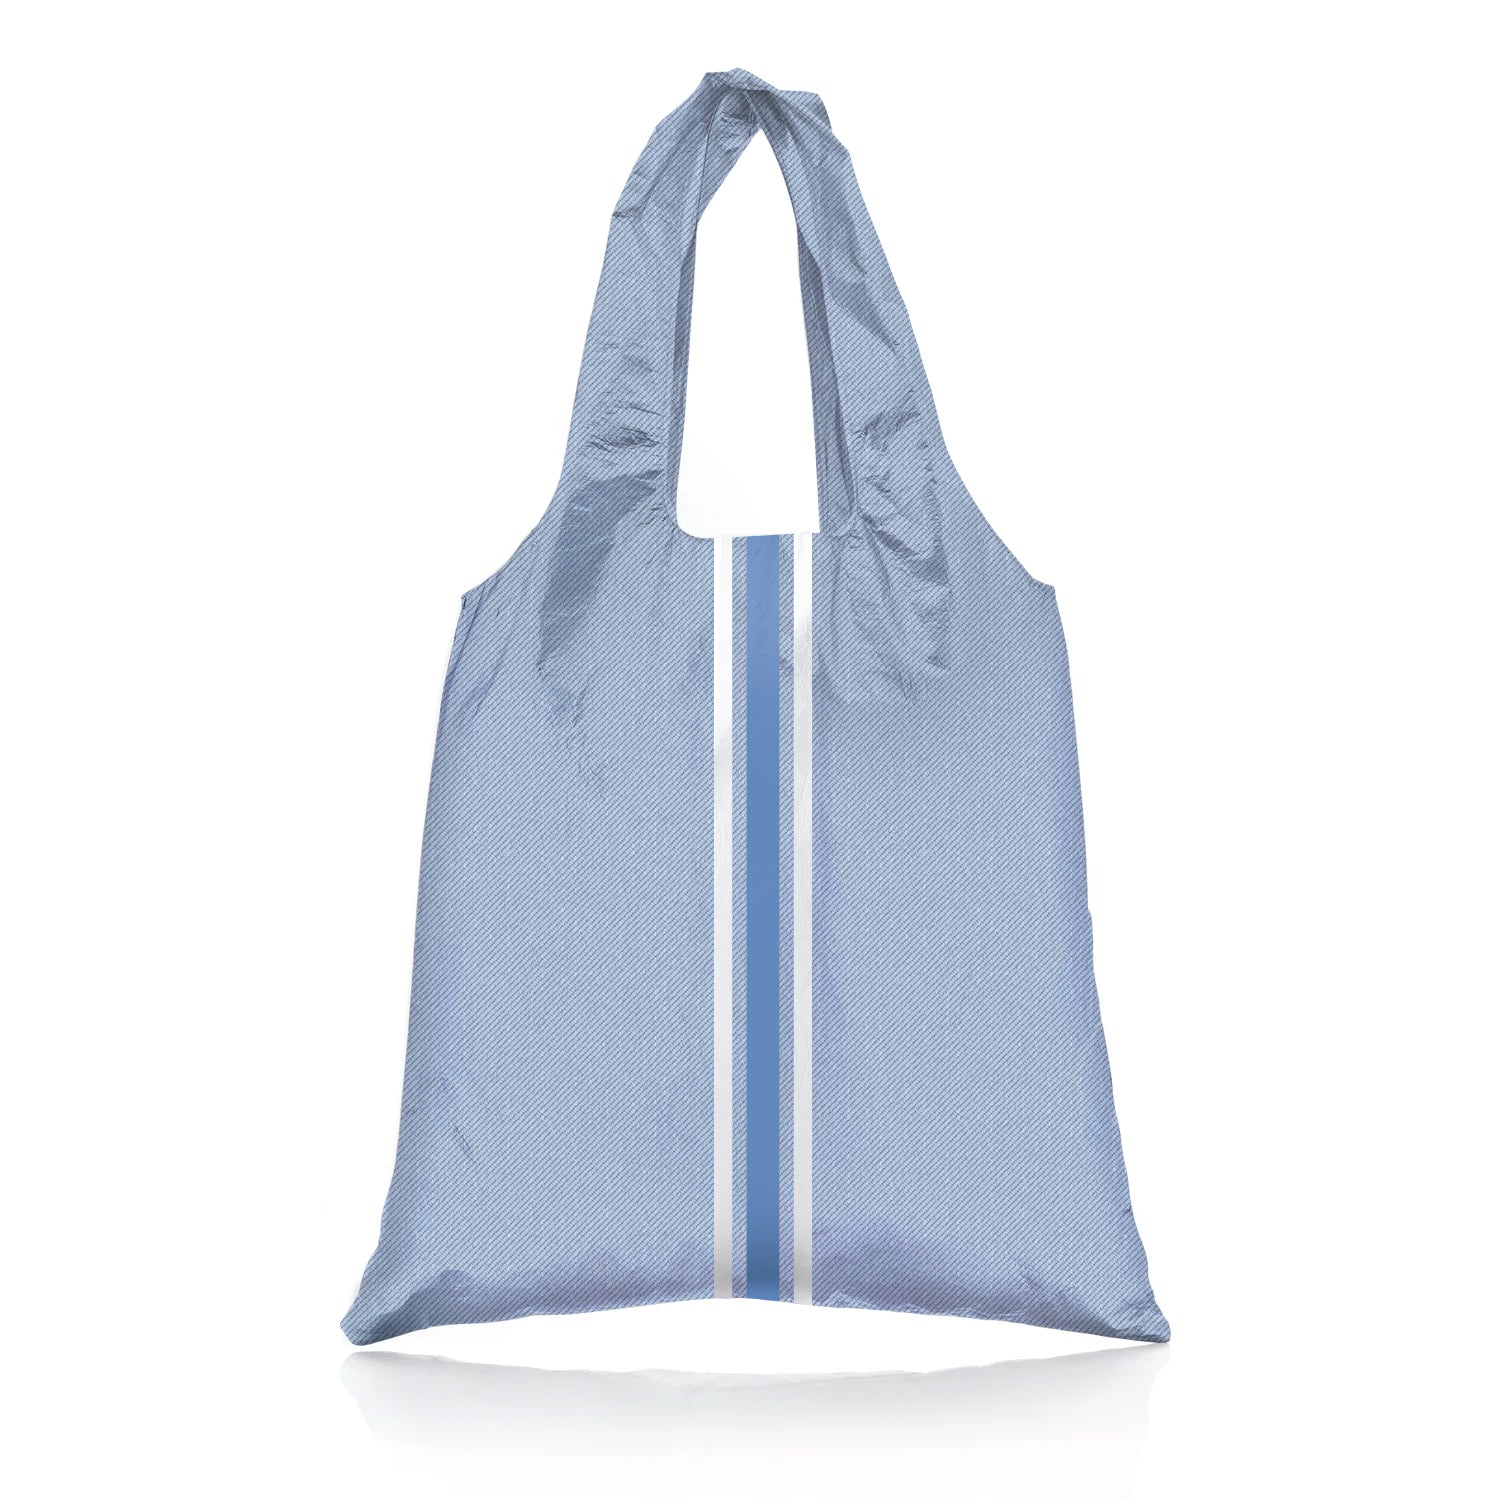 Carryall Tote Bag with Pocket in Denim with White and Blue Stripe